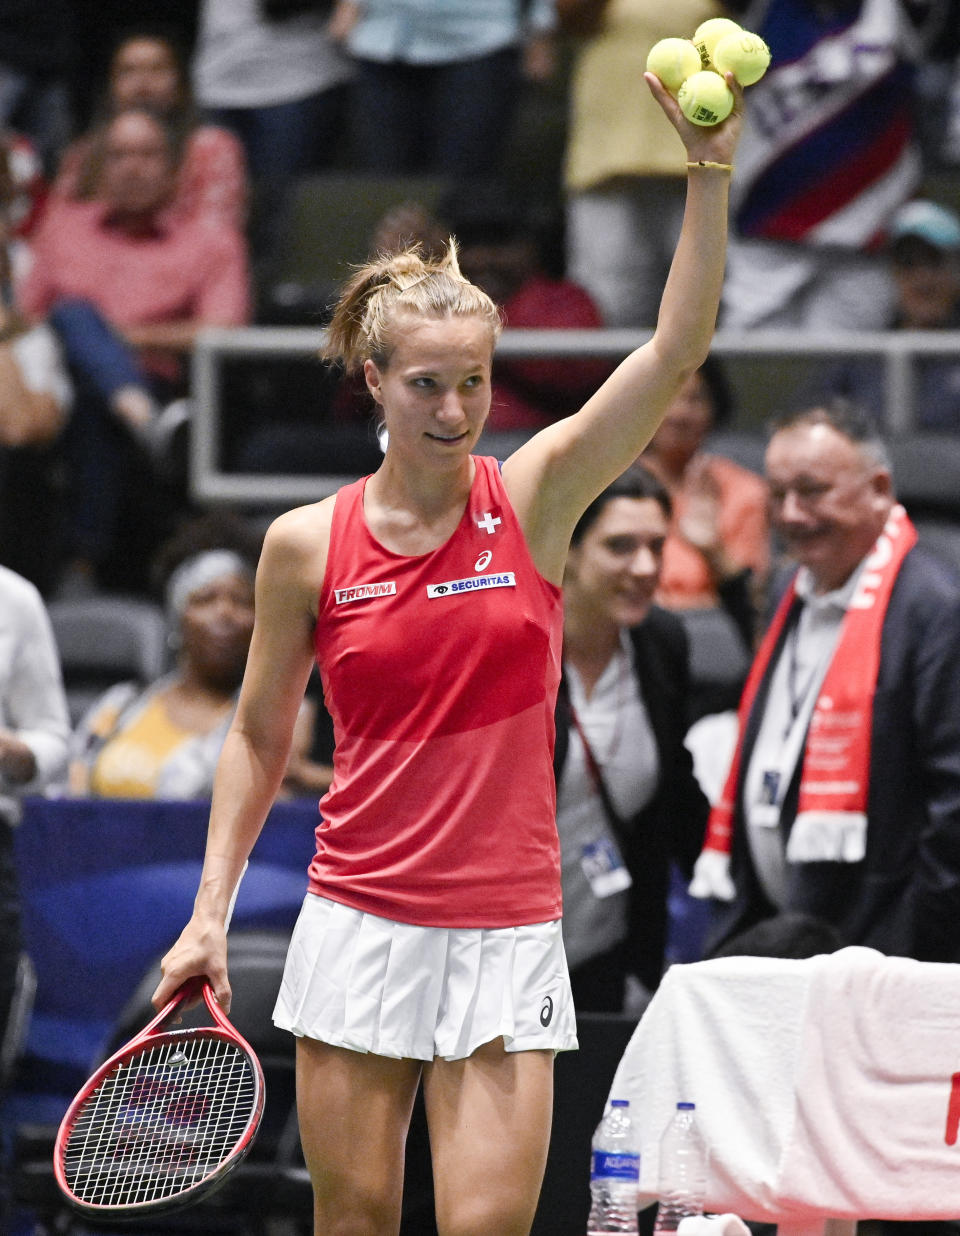 Switzerland's Viktorija Golubic waves to fans after her playoff-round Fed Cup tennis match win against Madison Keys of the United States, Saturday, April 20, 2019, in San Antonio. (AP Photo/Darren Abate)